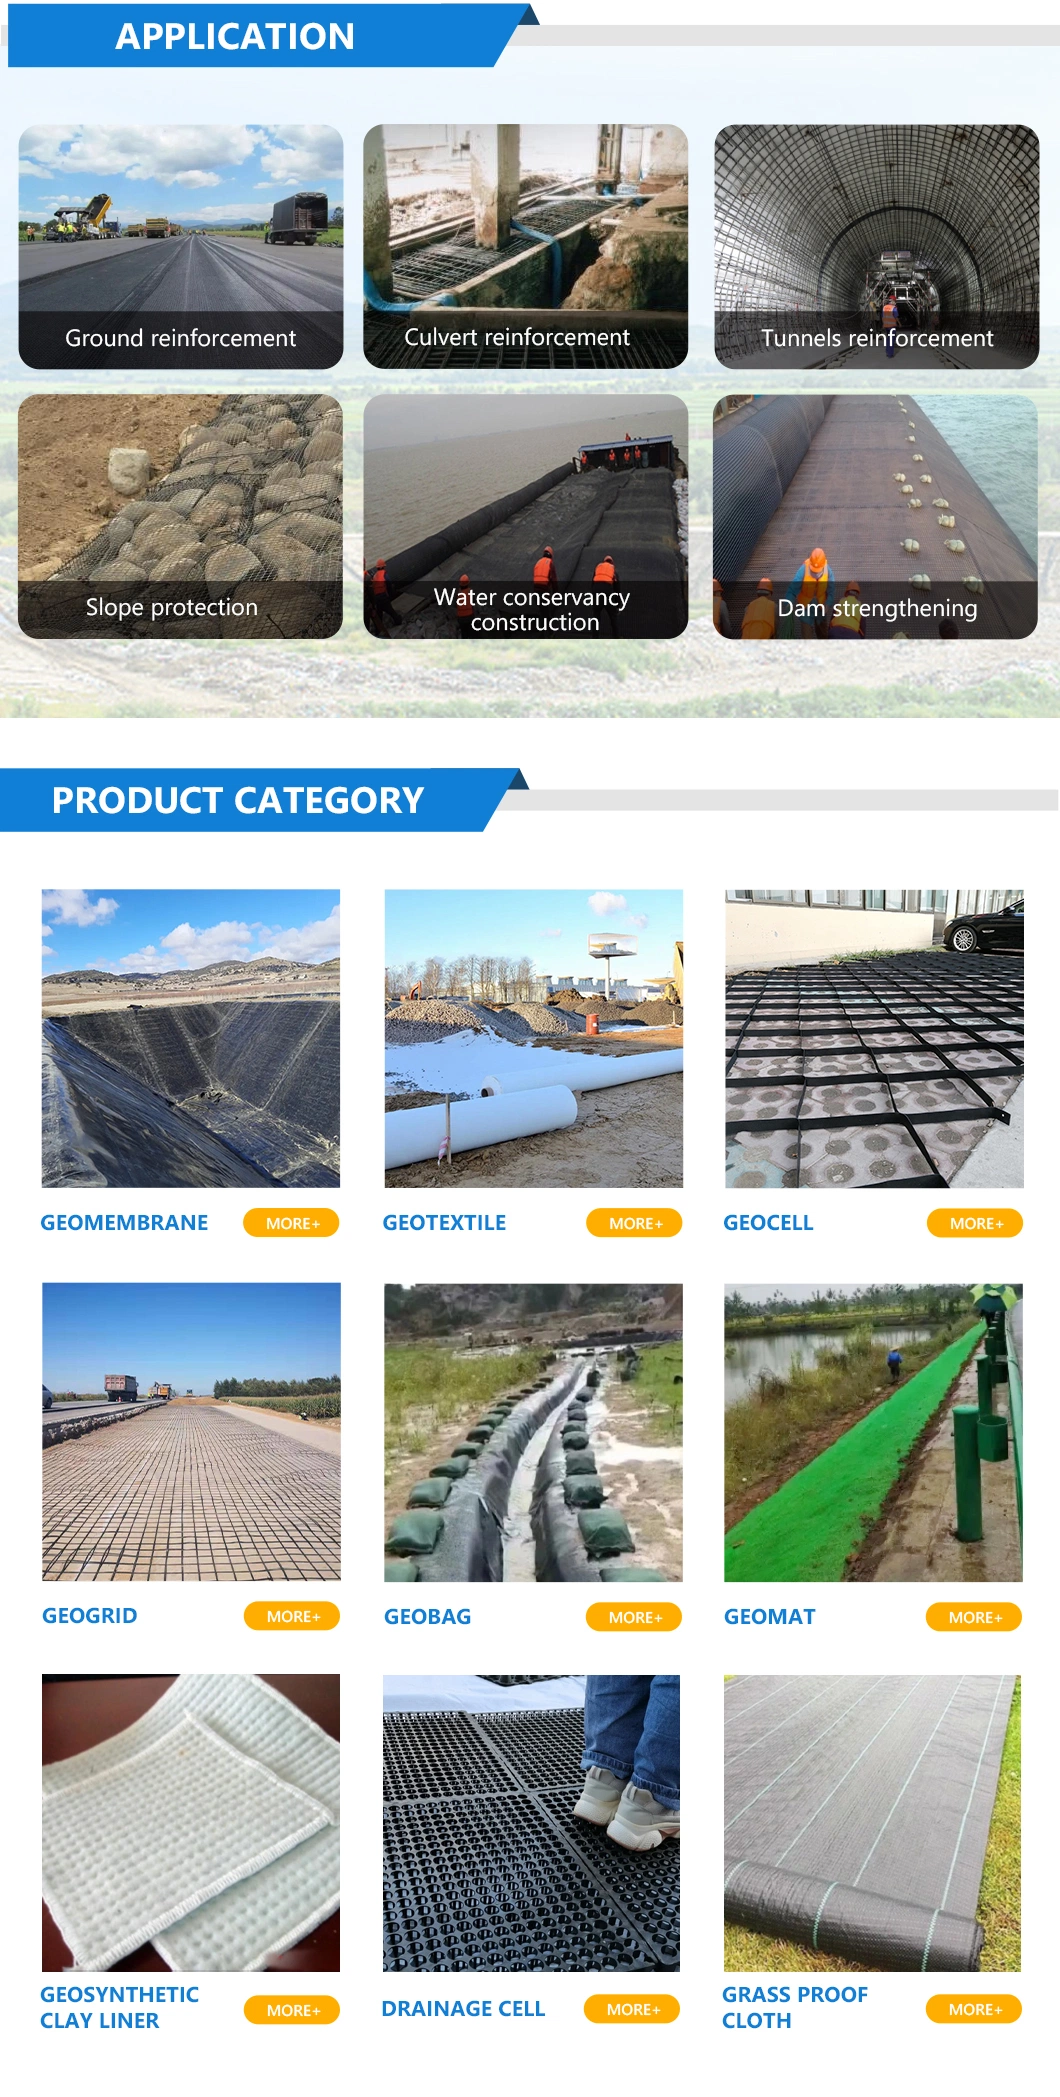 Customzied 50kn PP Plastic Biaxial Geogrid Manufacturer for Dam and Roadbed/Slope Protection/Wall Reinforcement/Roadbed Bearing Capacity Improvement in Airfield